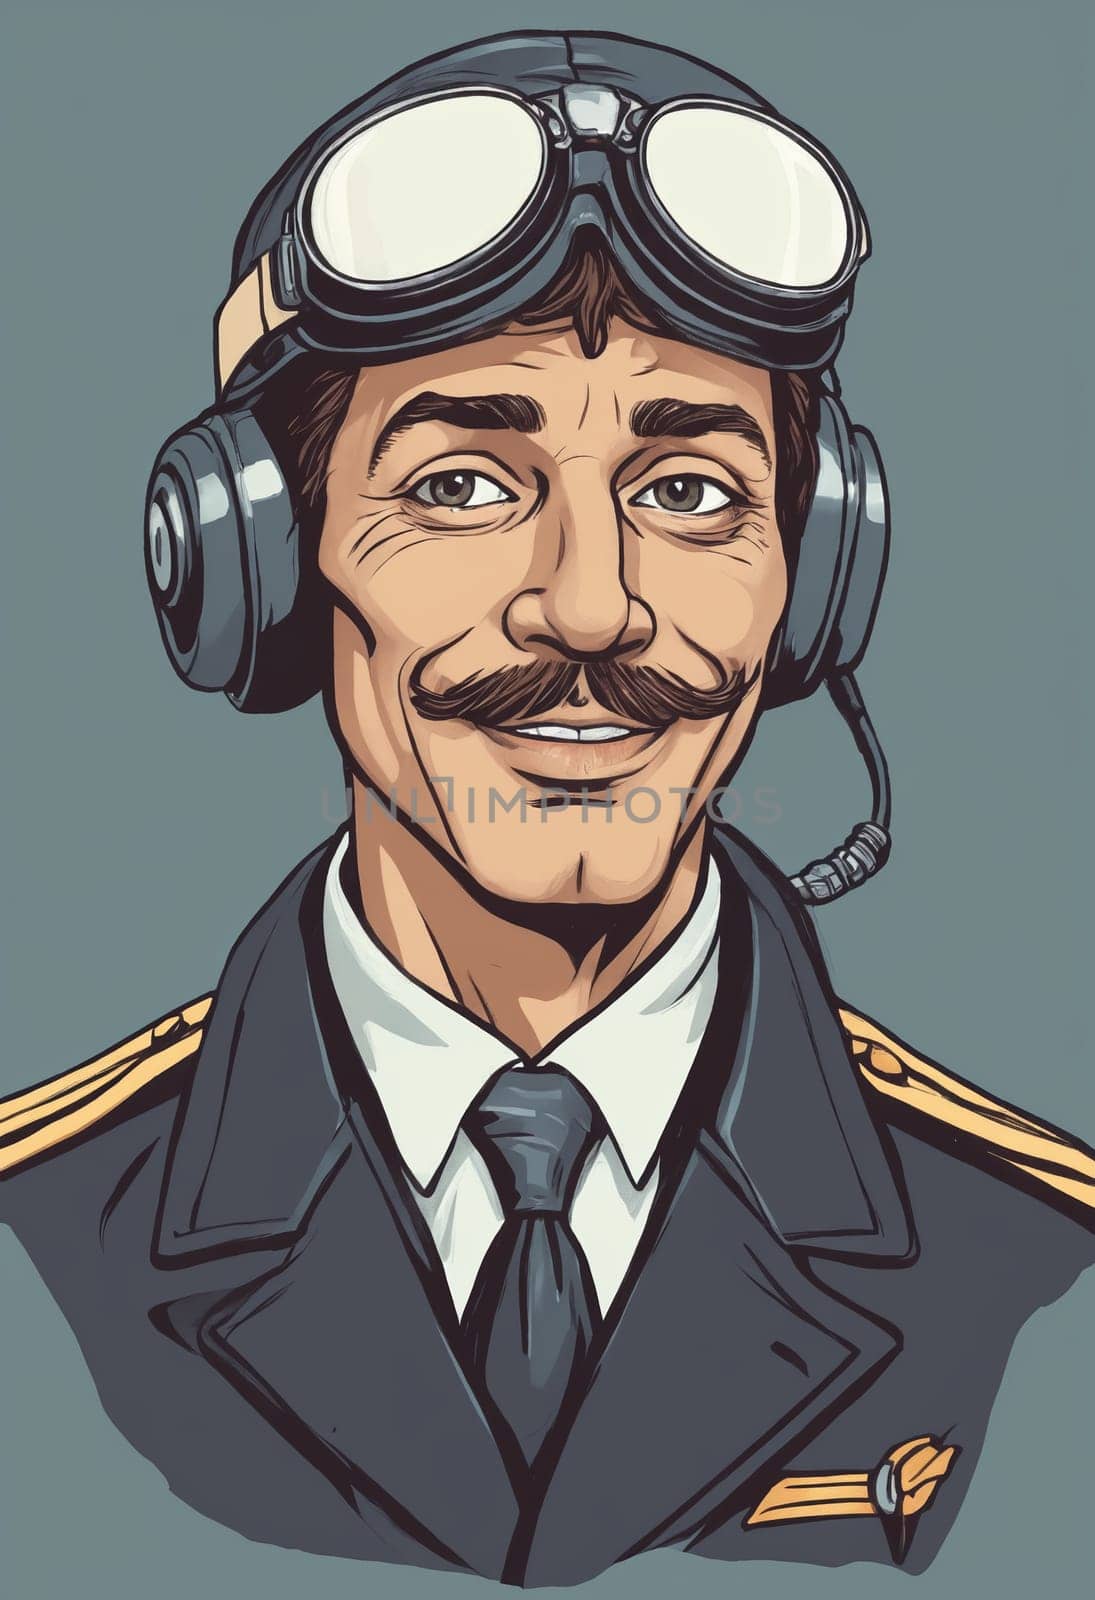 Aviator in uniform featuring badge and epaulettes, ready for commanding a flight.